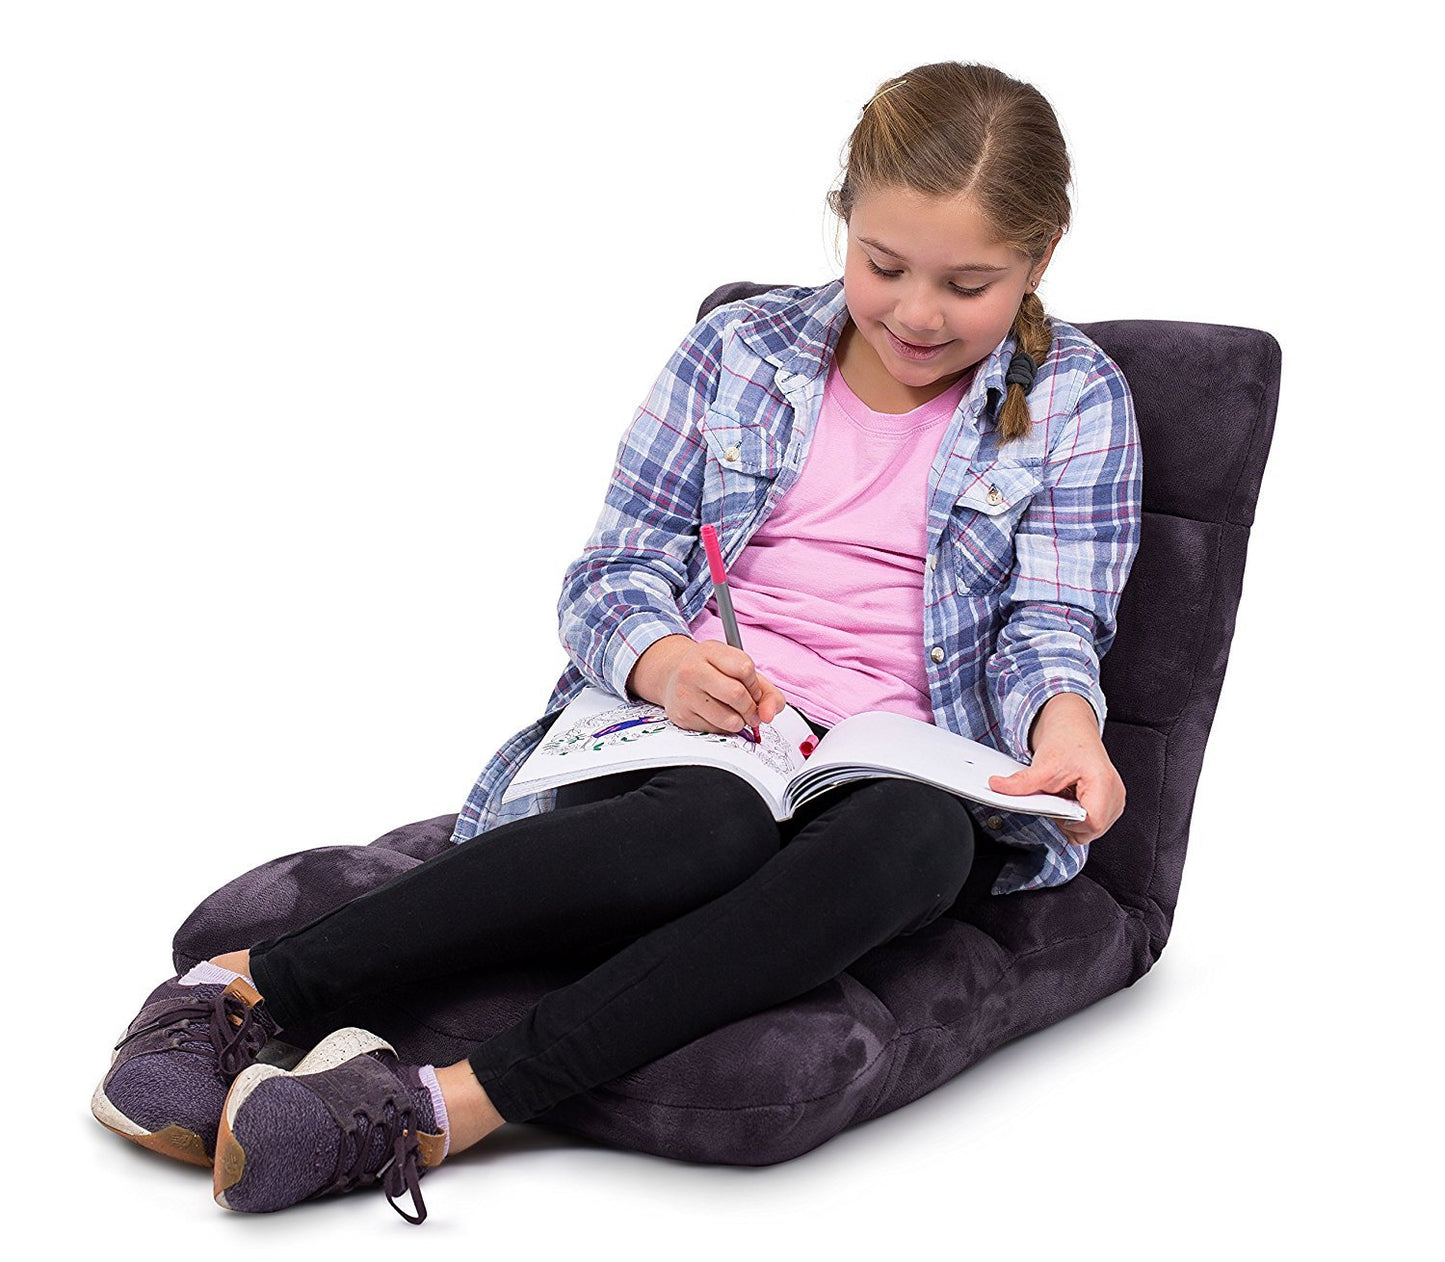 BIRDROCK HOME Adjustable 14-Position Memory Foam Floor Chair for Gaming or Reading | Thick Floor Cushion with Back Support | Comfy Chair for Kids | Eggplant